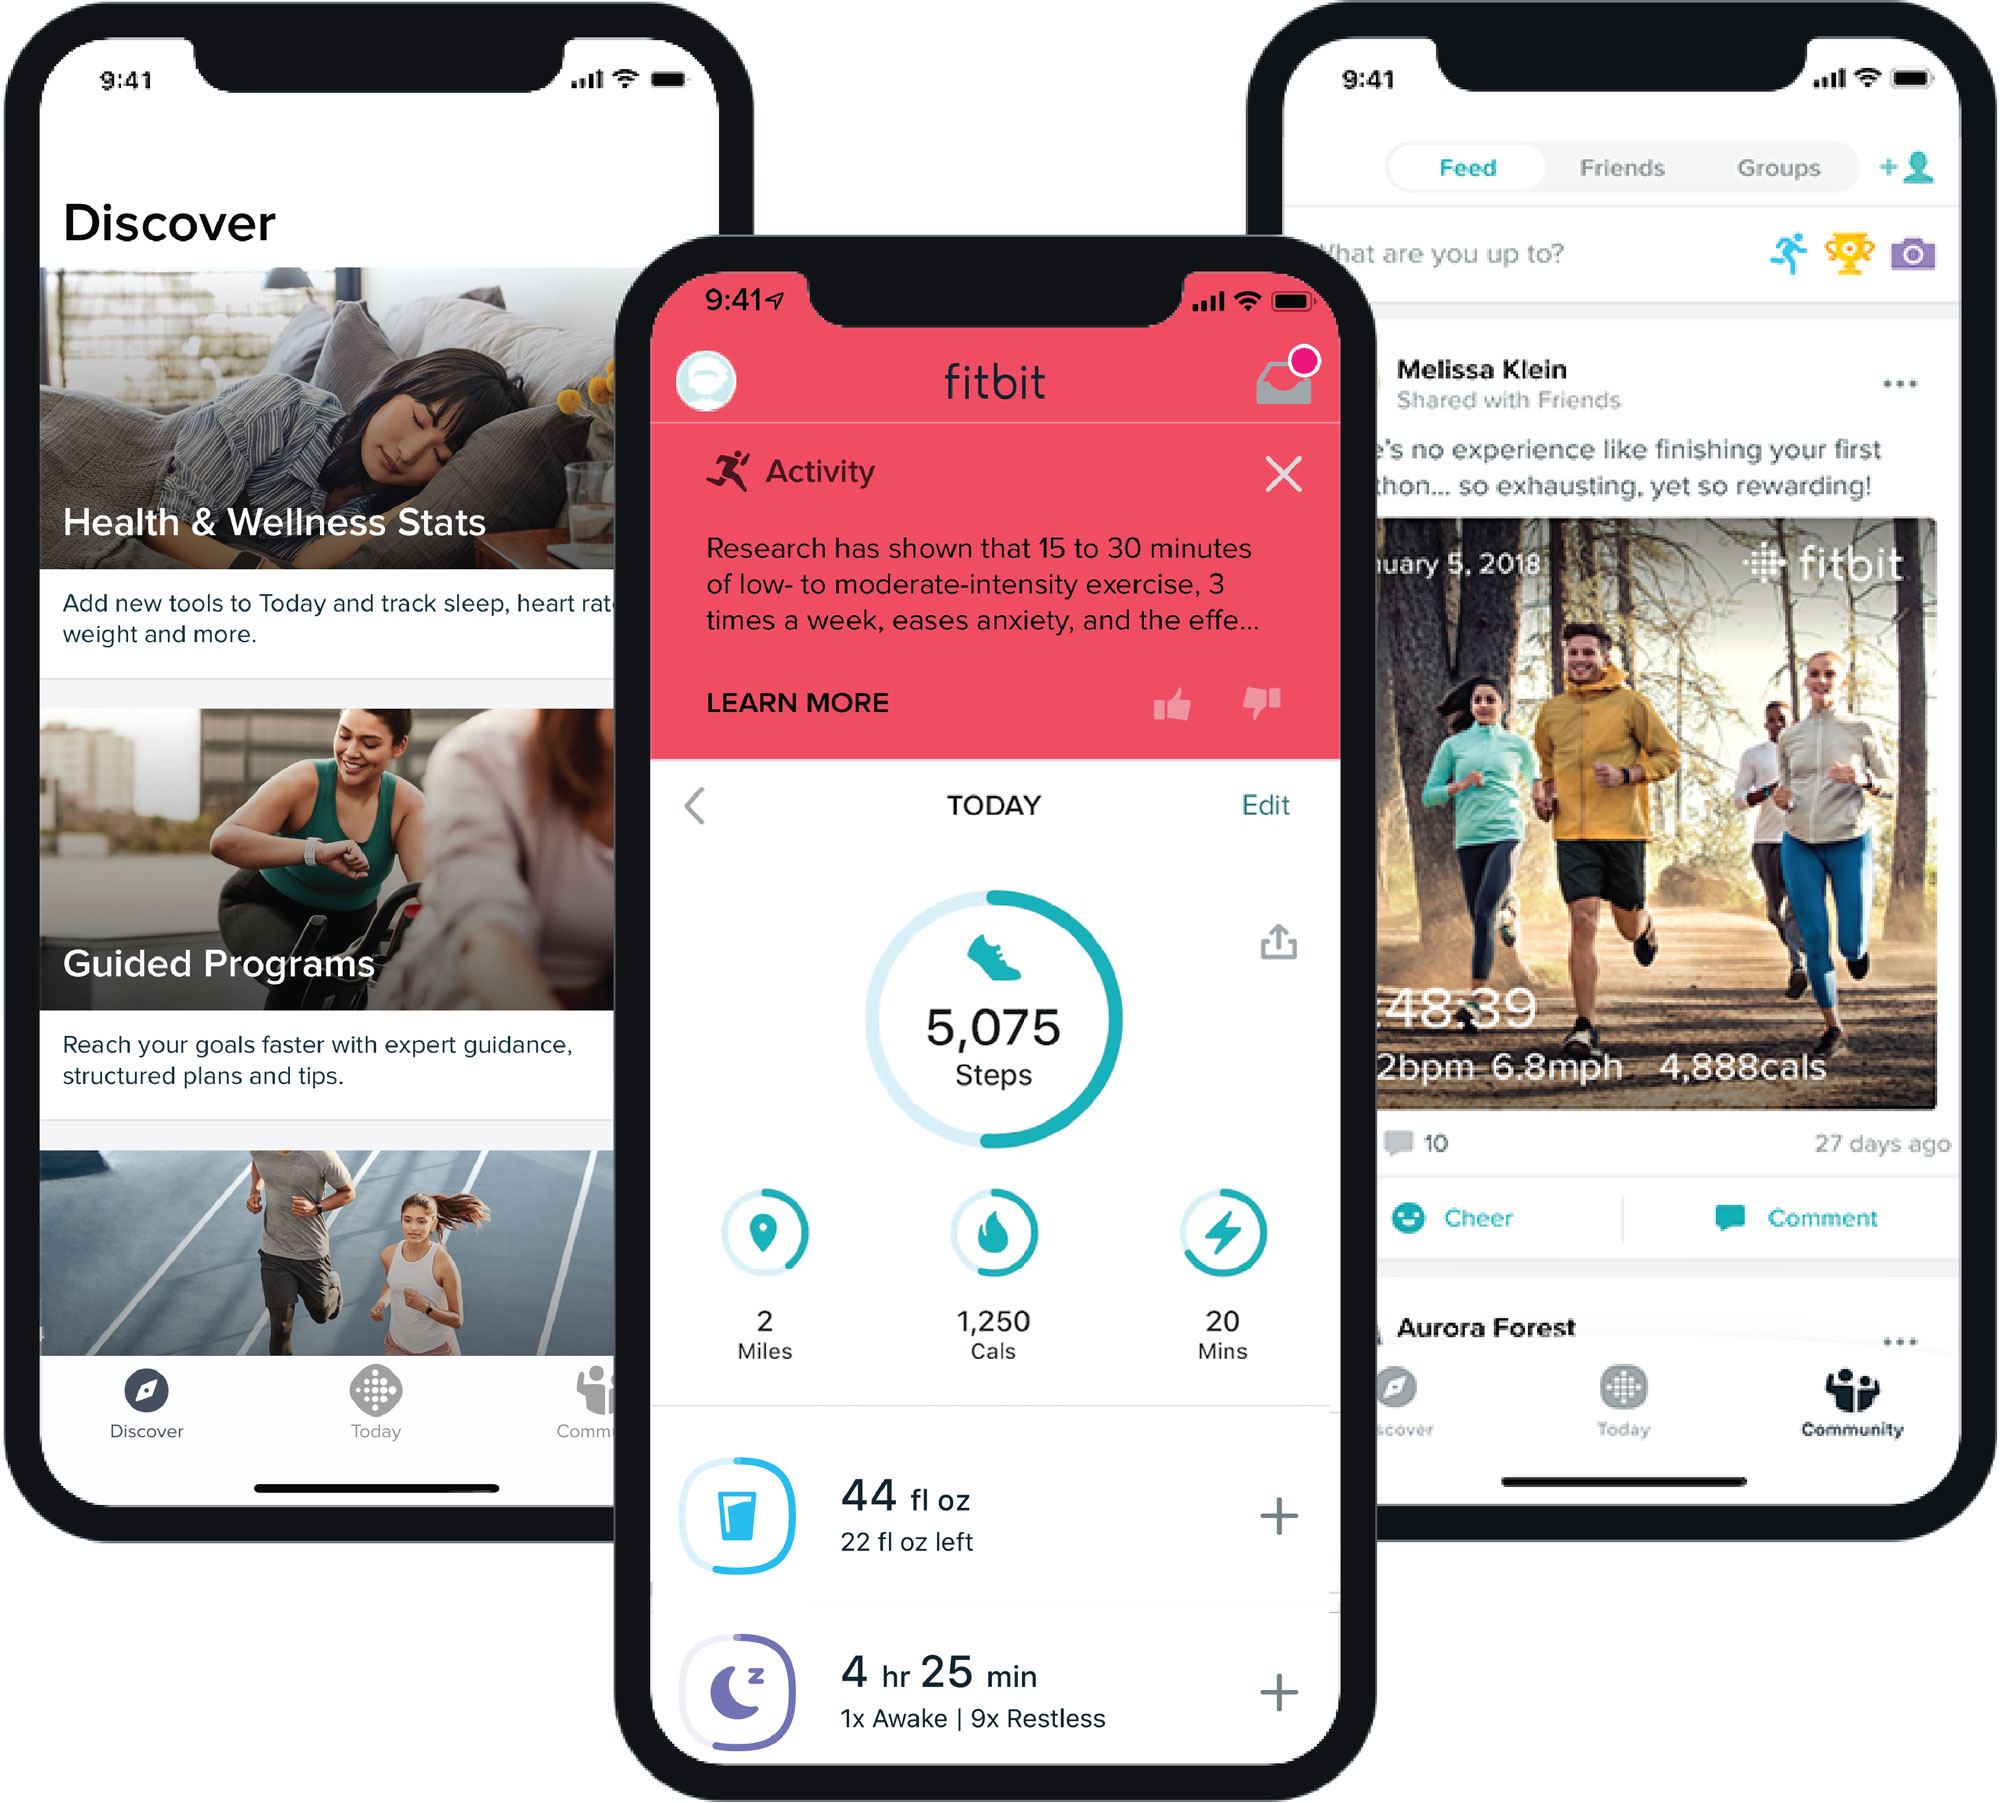 Discover tab, Today tab, and the Community tab in the Fitbit app